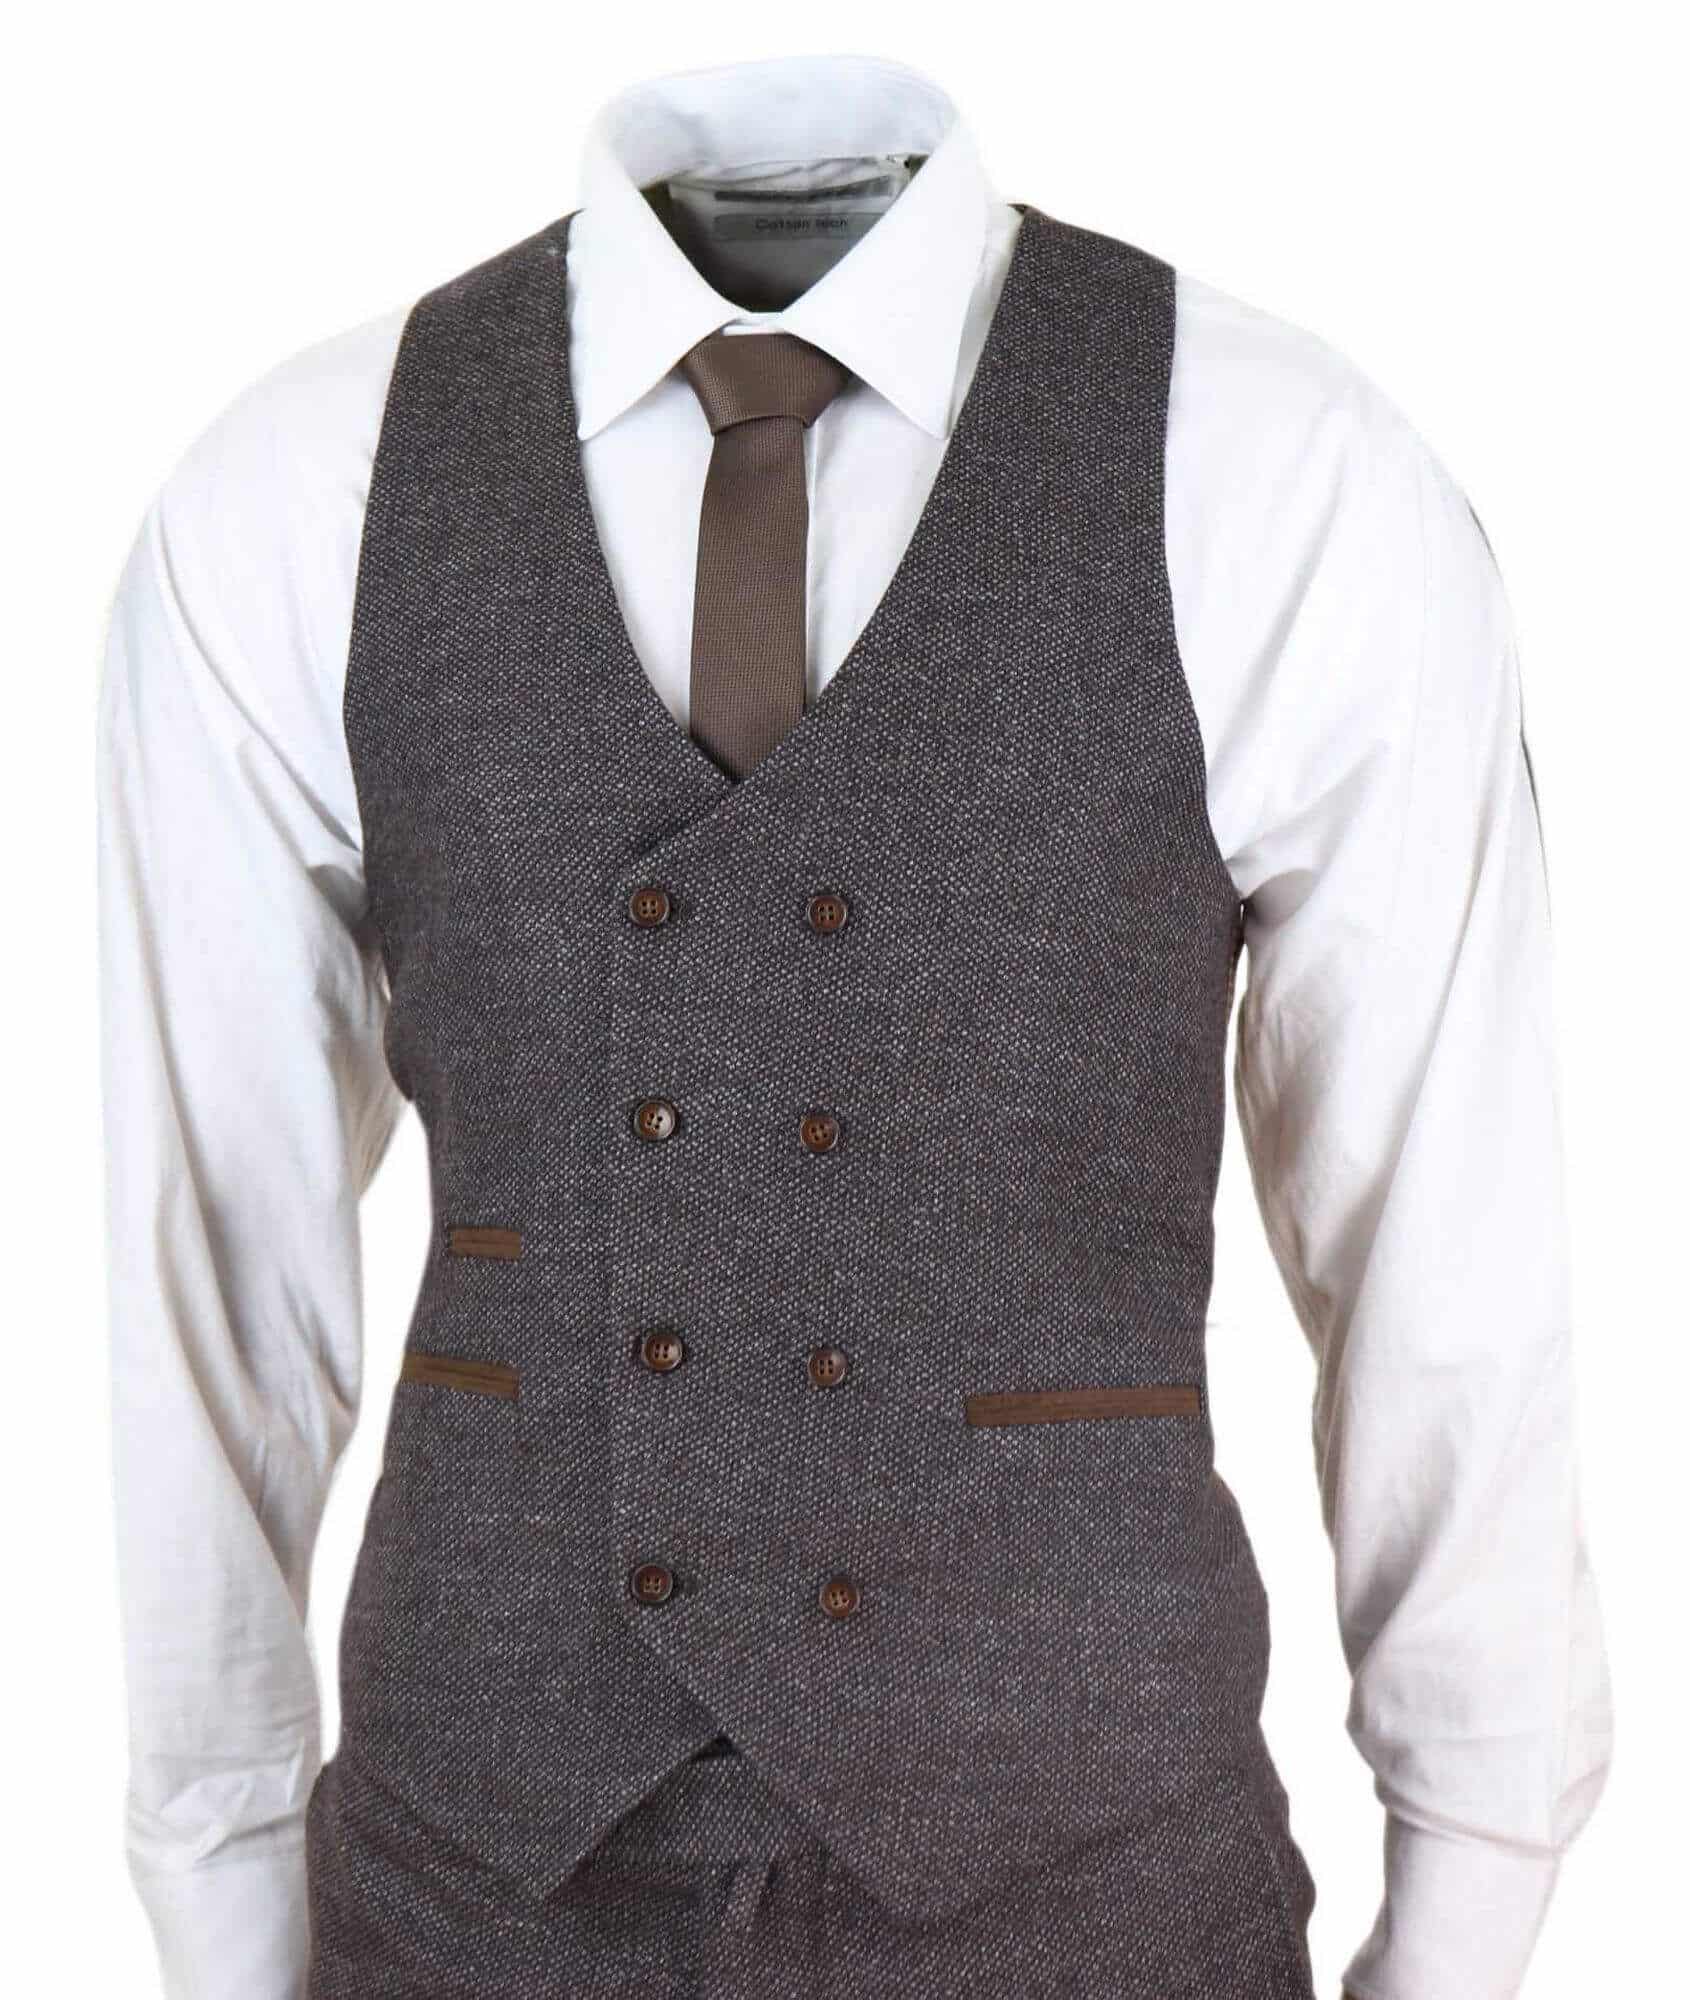 Wool Herringbone Suit Vest For Mens Formal Grooms Wear, Grey Wedding Vest Mens  Waistcoat In Plus Size And Custom Size From Wloveapparel, $33.51 |  DHgate.Com